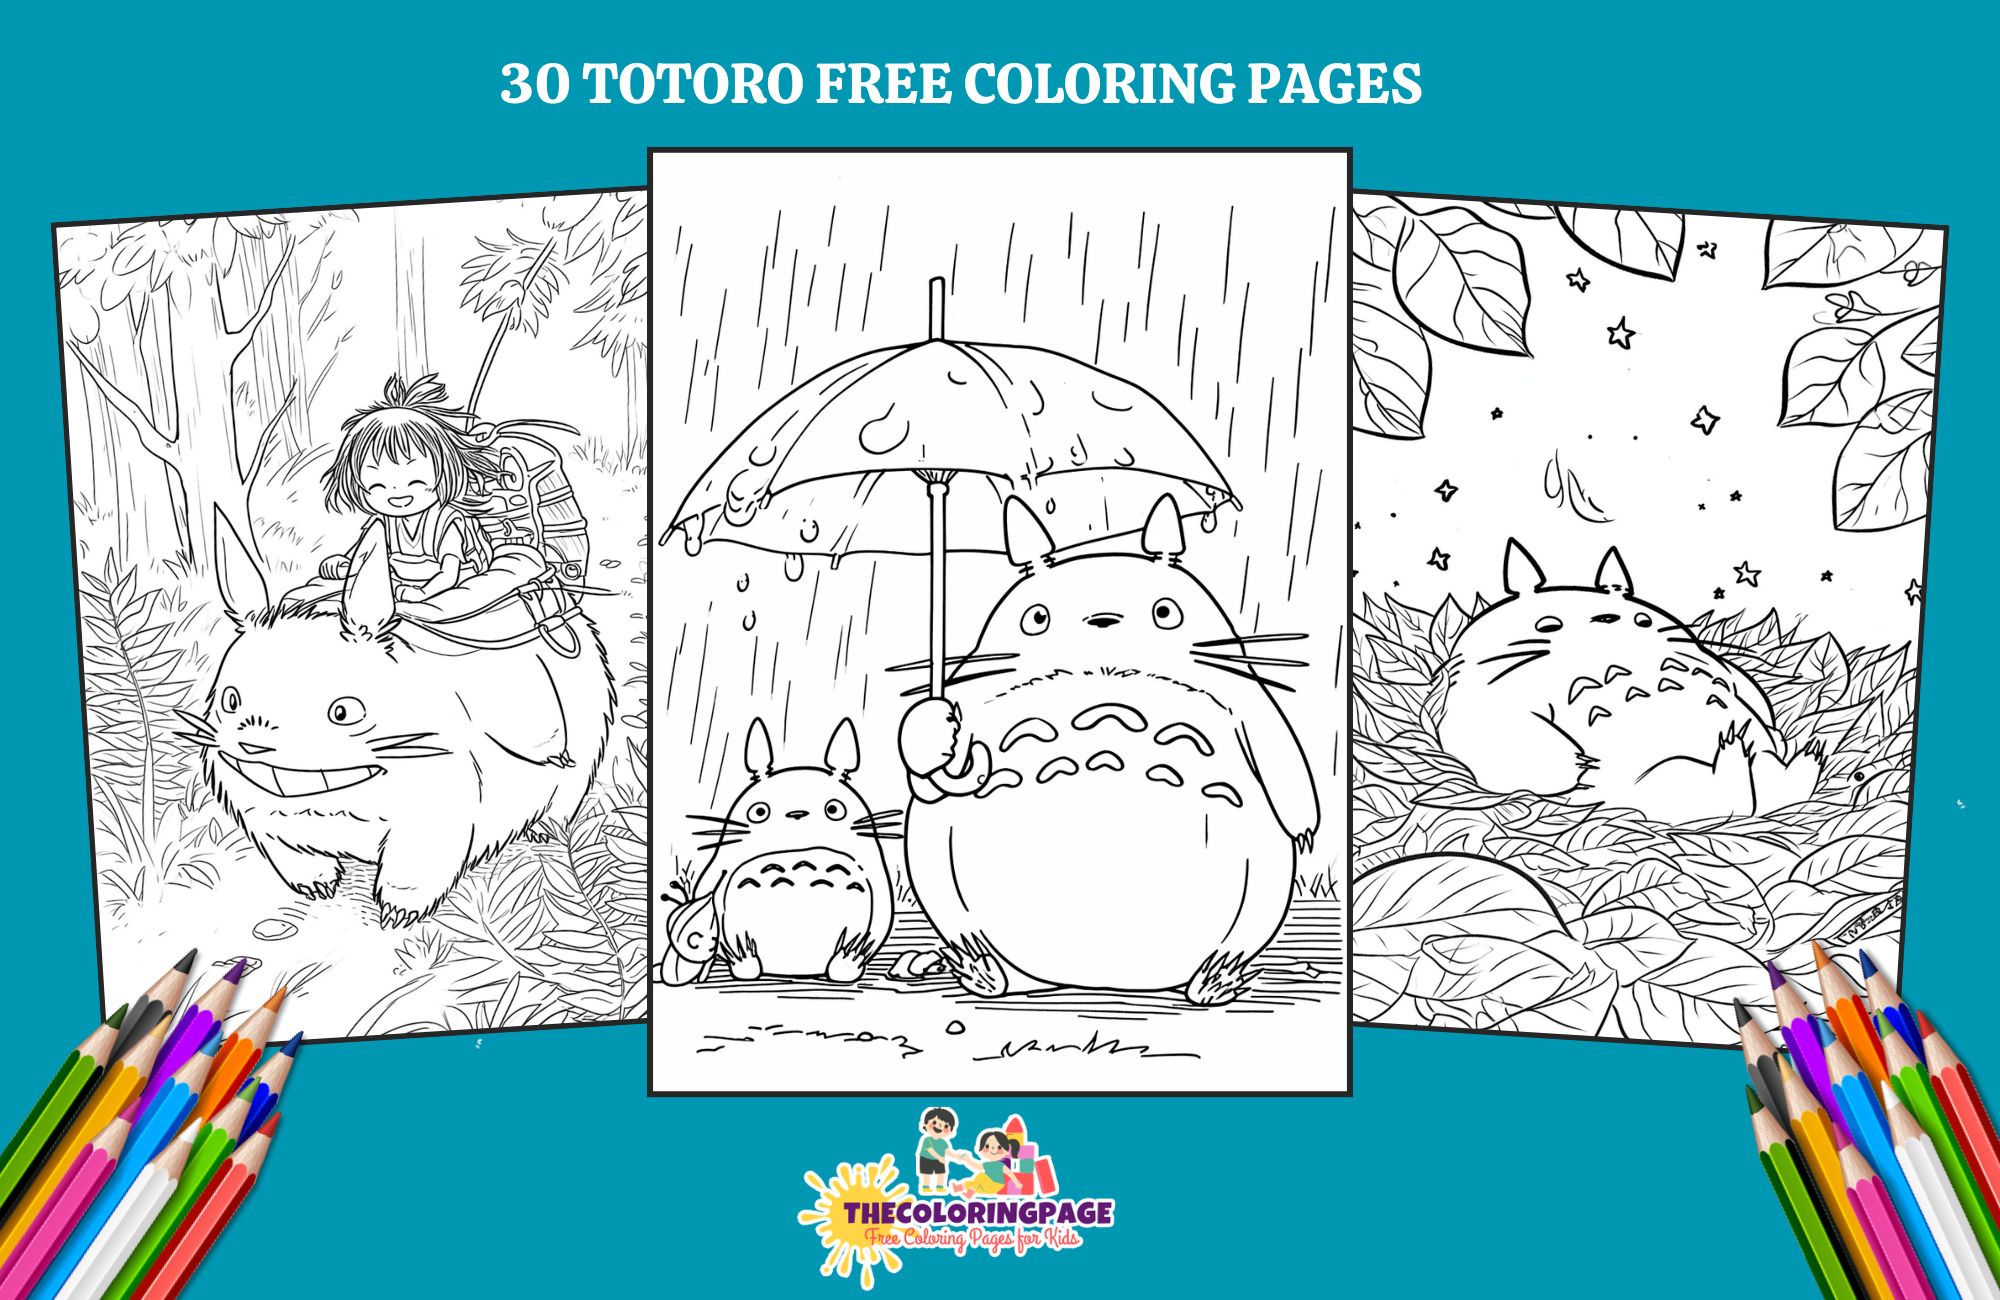 30 Free Totoro Coloring Pages For Kids - Perfect for Kids’ Creative Time